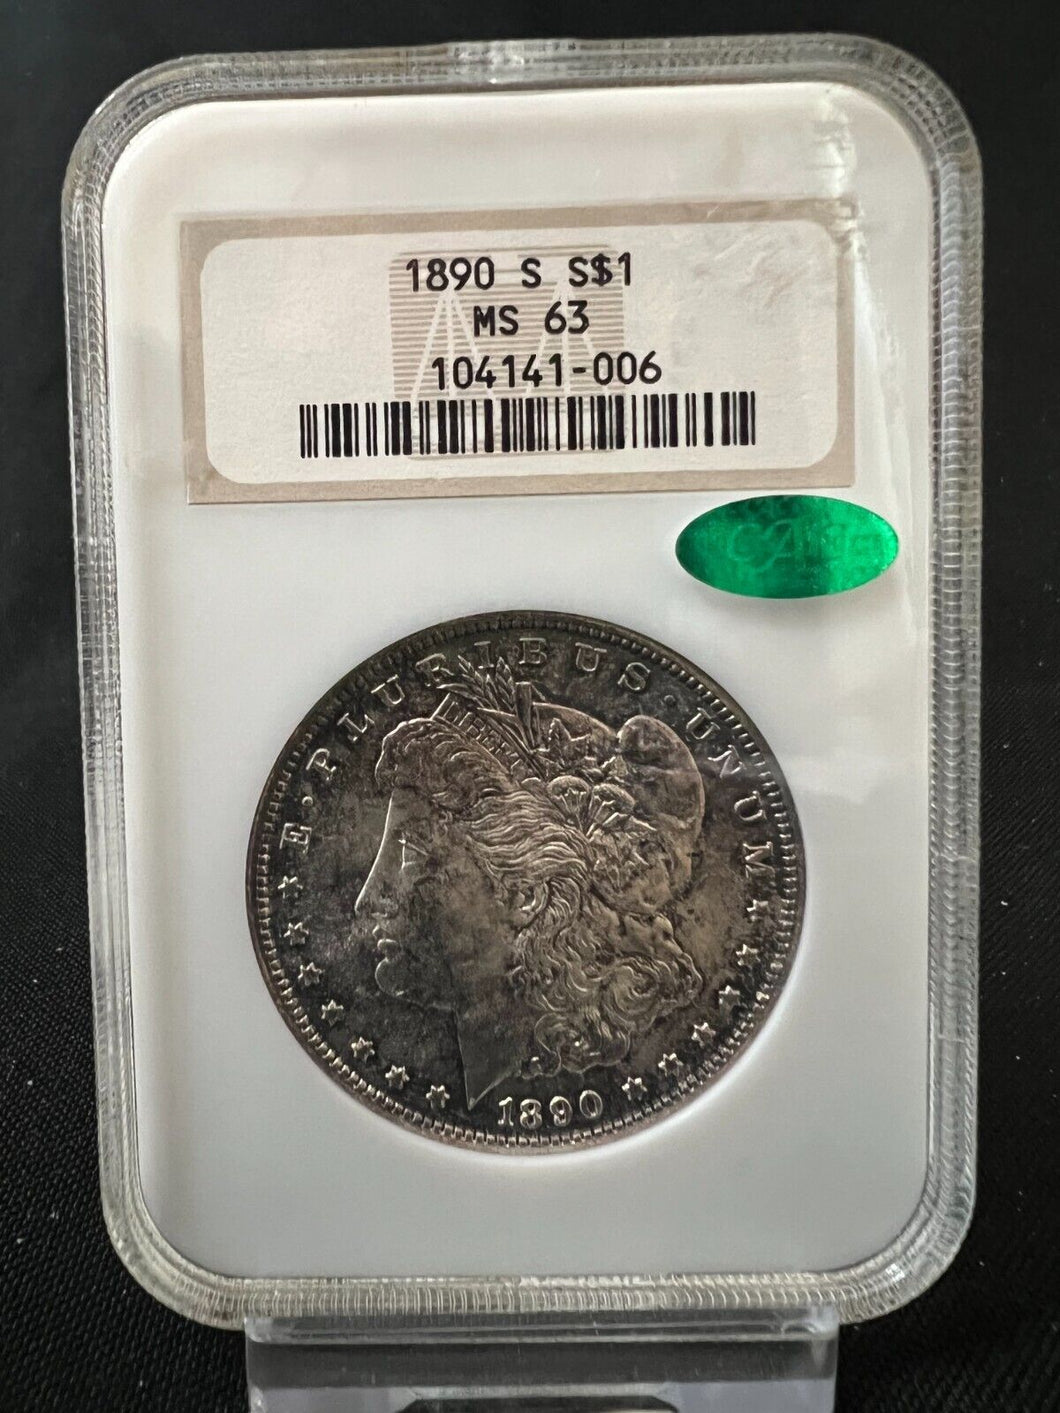 1890-S $1 Morgan Silver Dollar NGC MS63 - Frosty and Peripheral Toned Gem (CAC)